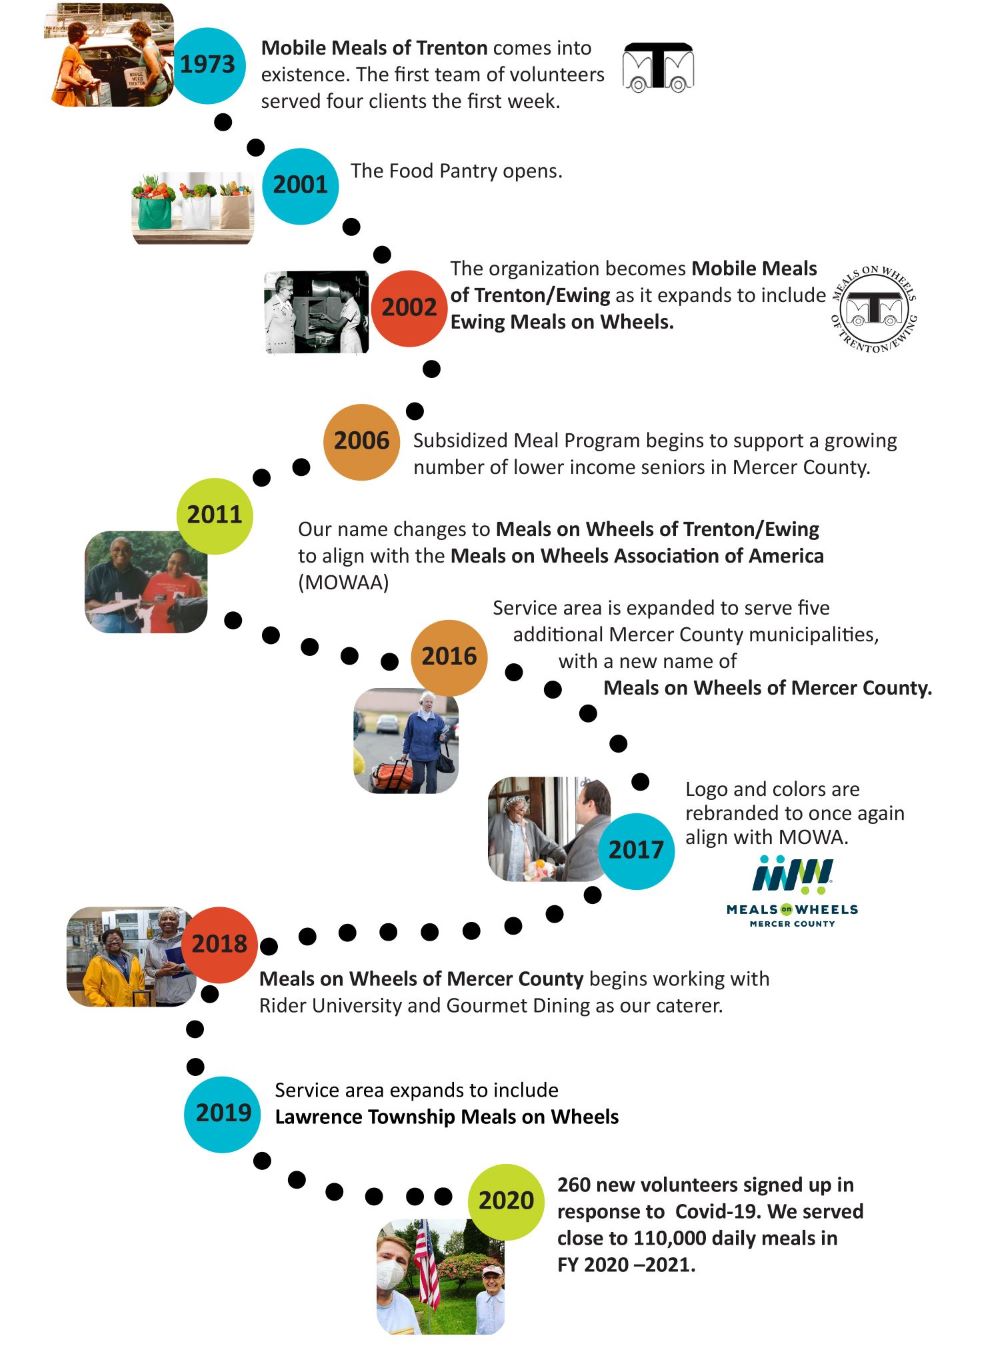 History Timeline - Meals on Wheels of Mercer County